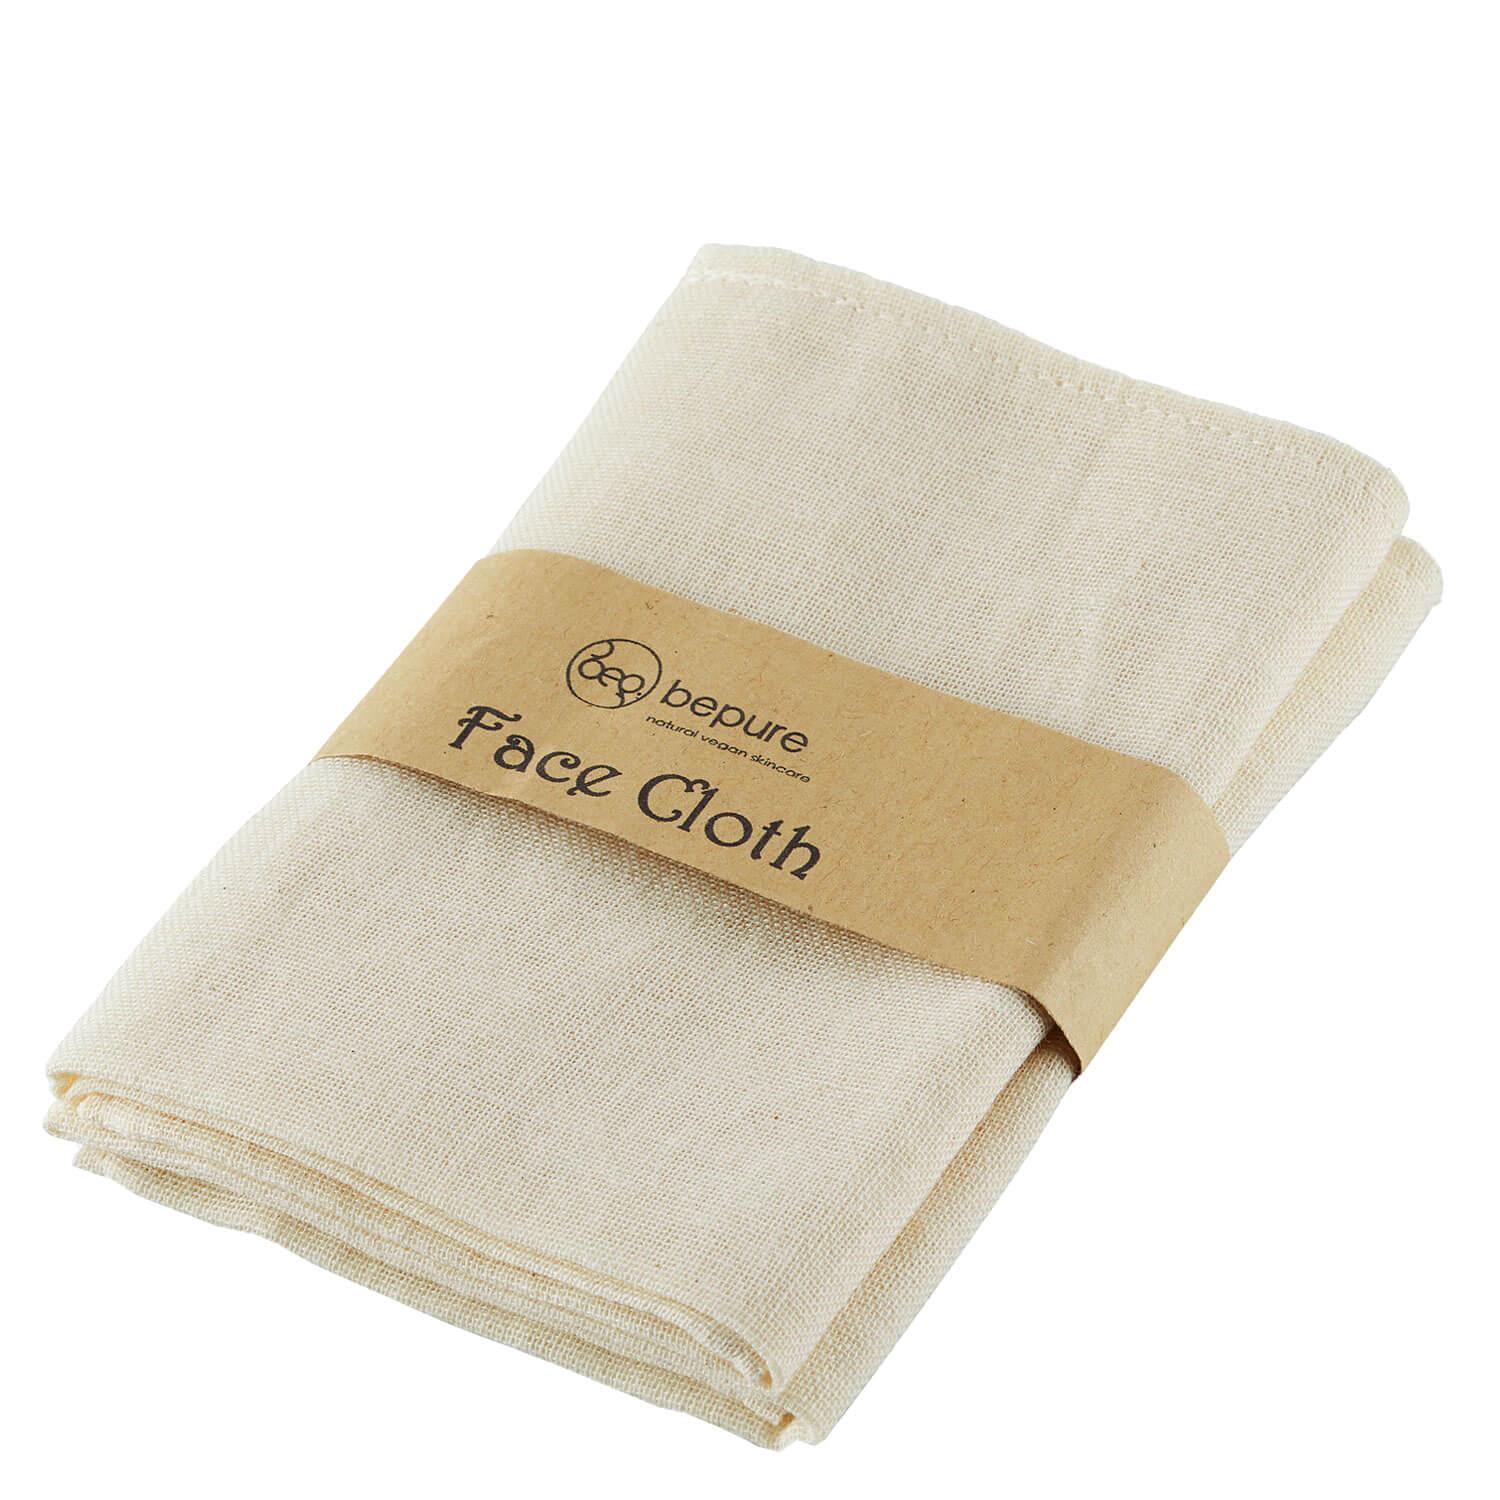 bepure - ORGANIC FACE CLOTH (2er Pack)